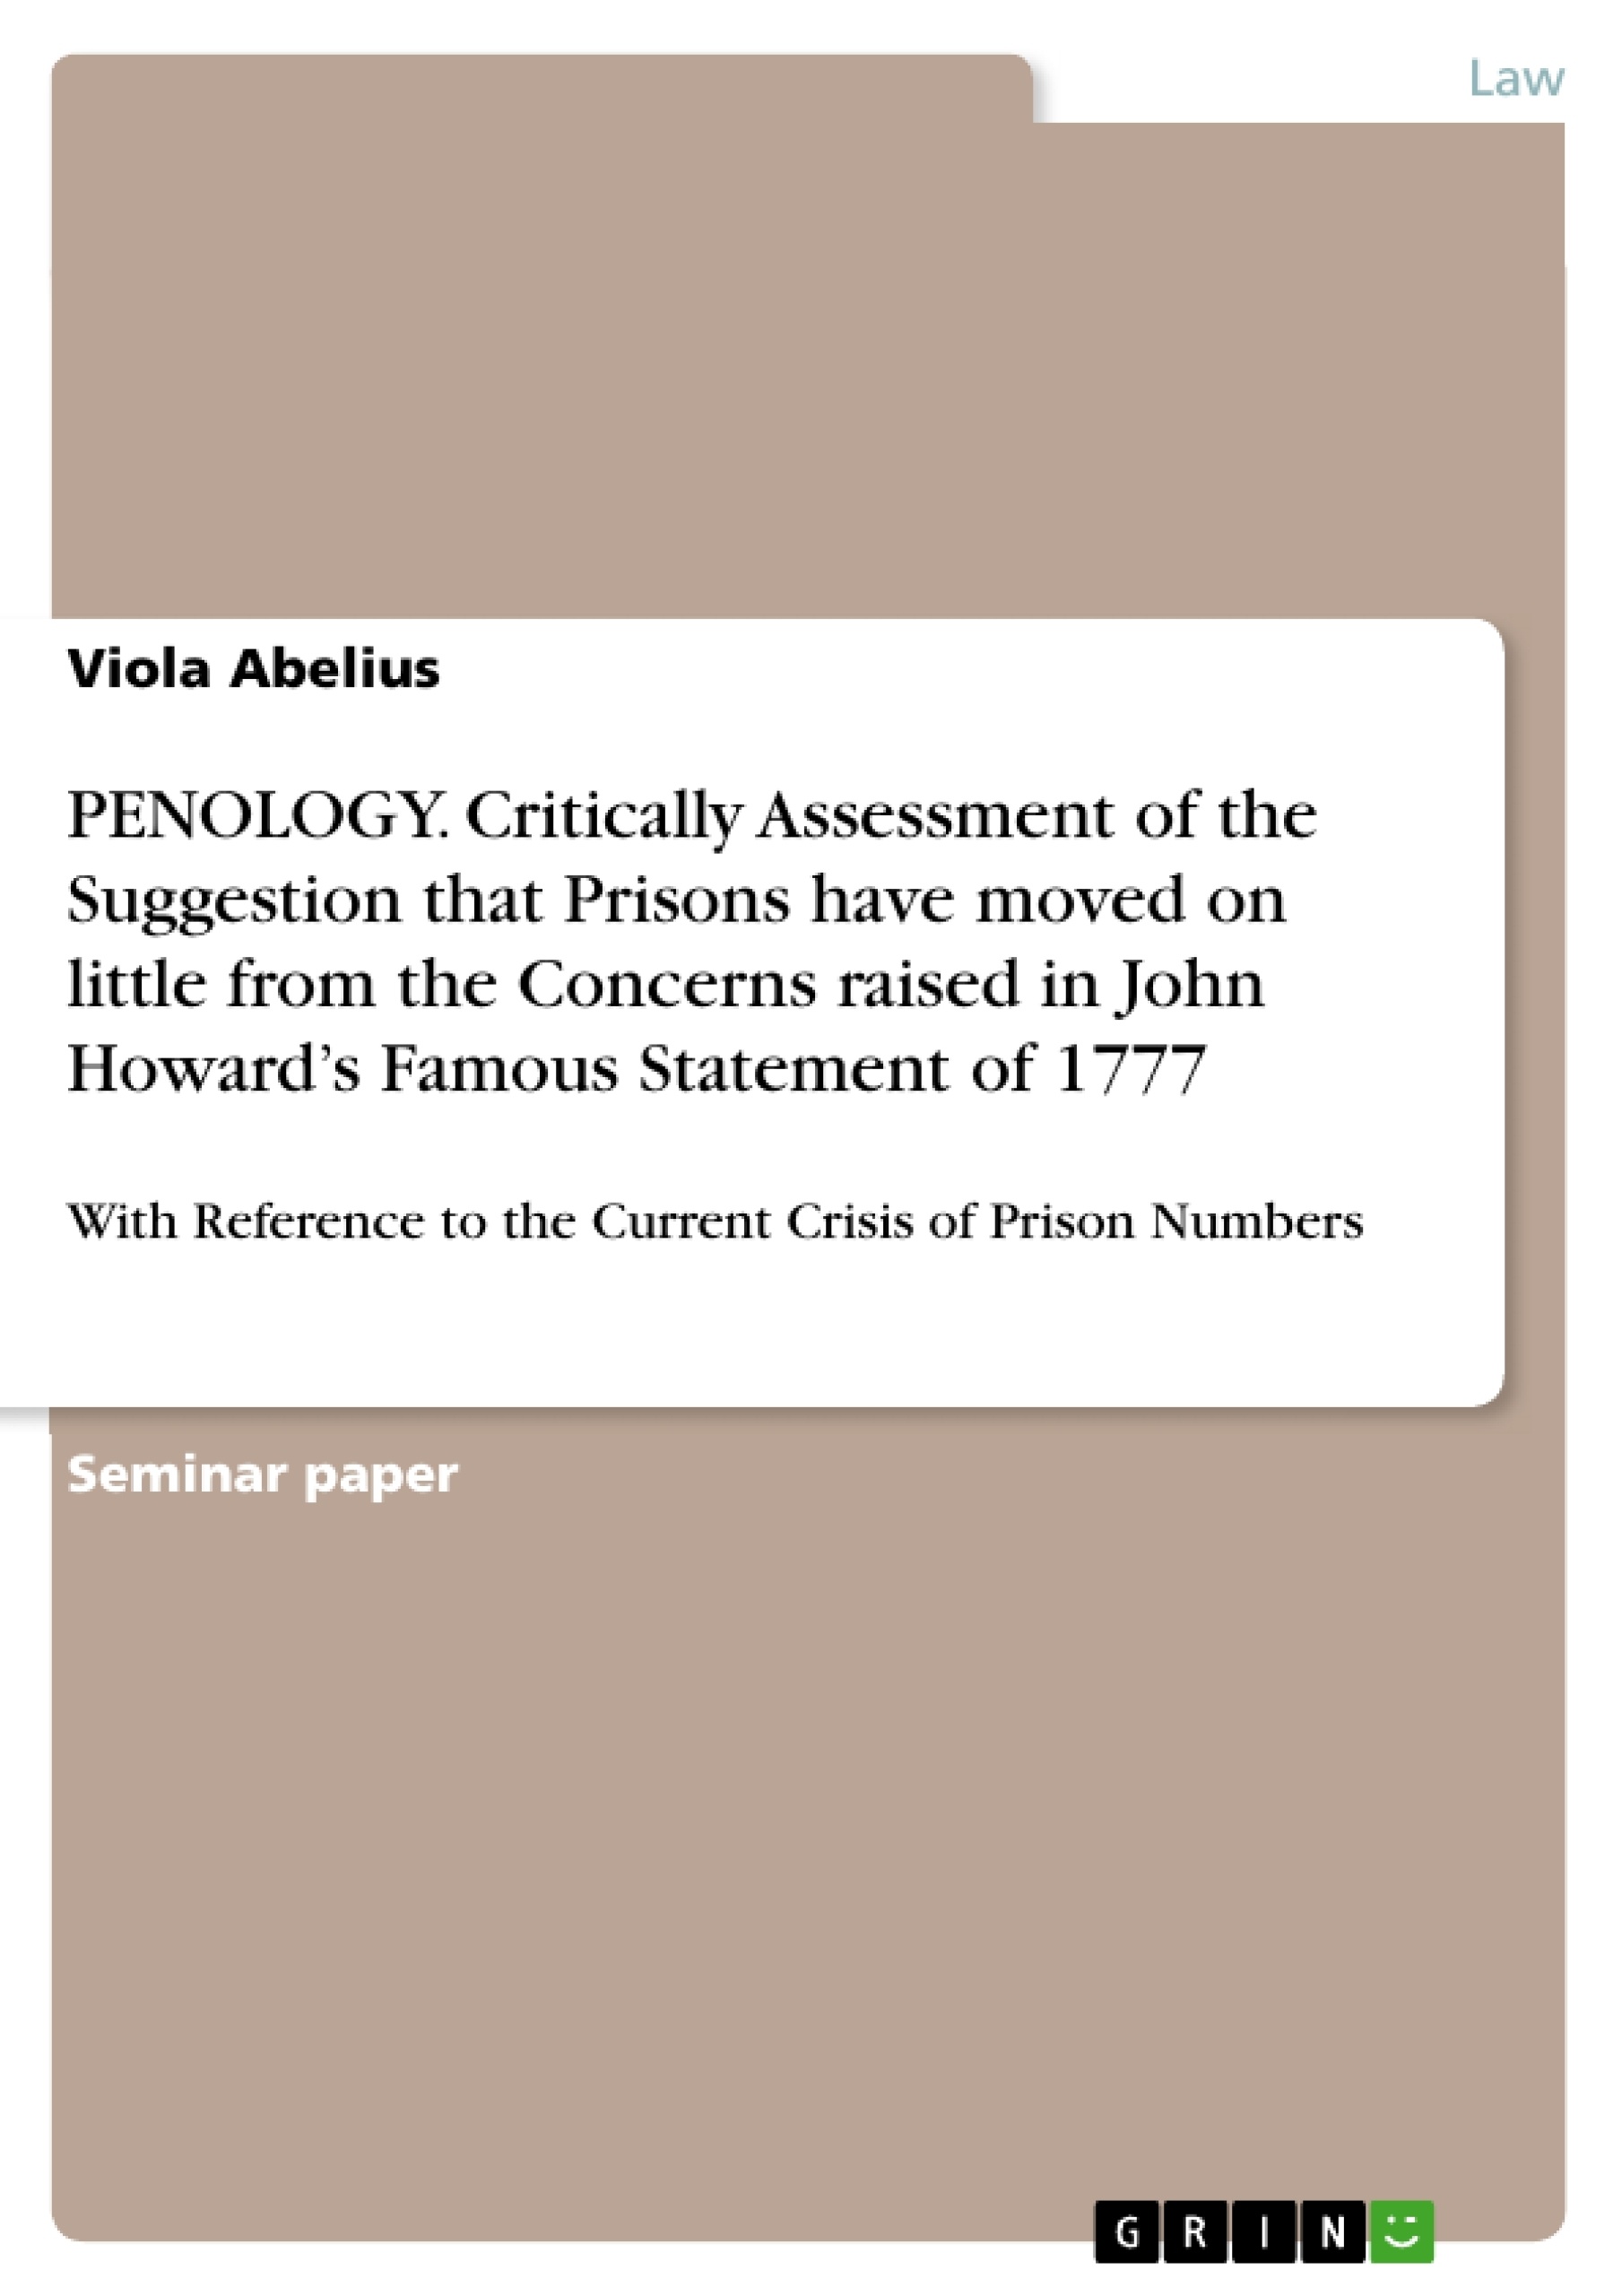 Title: PENOLOGY. Critically Assessment of the Suggestion that Prisons have moved on little from the Concerns raised in John Howard’s Famous Statement of 1777